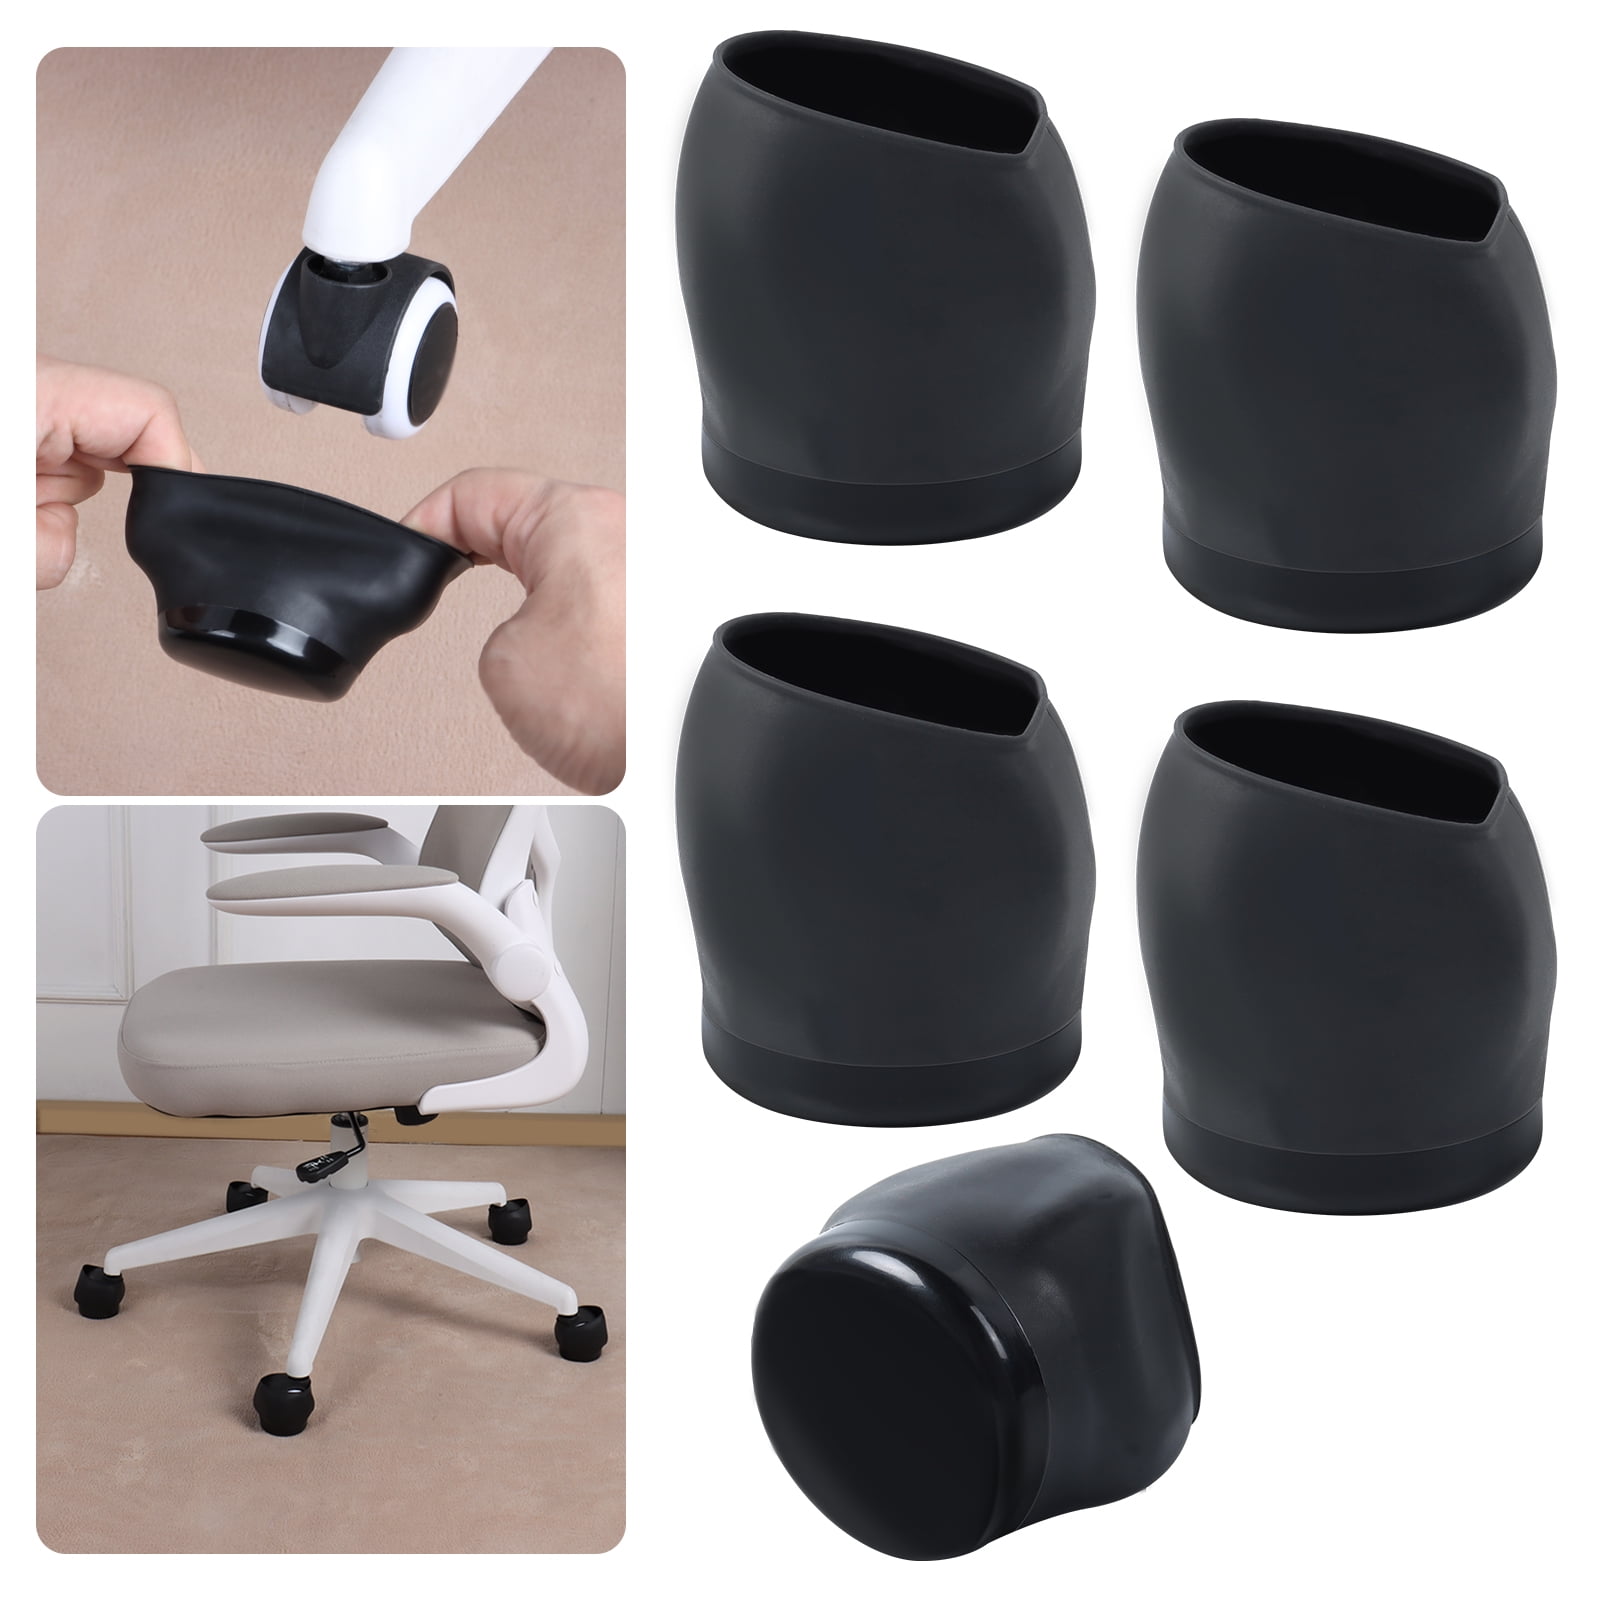 10PCS Wheel Stoppers for Rolling Furniture Feet Floor Protectors, 2 Inch  Office Chair Wheel Stopper, Felt Furniture Caster Cups for Hardwood Floors,  Anti-Scratch, Stop Chair from Rolling, Black : Buy Online at